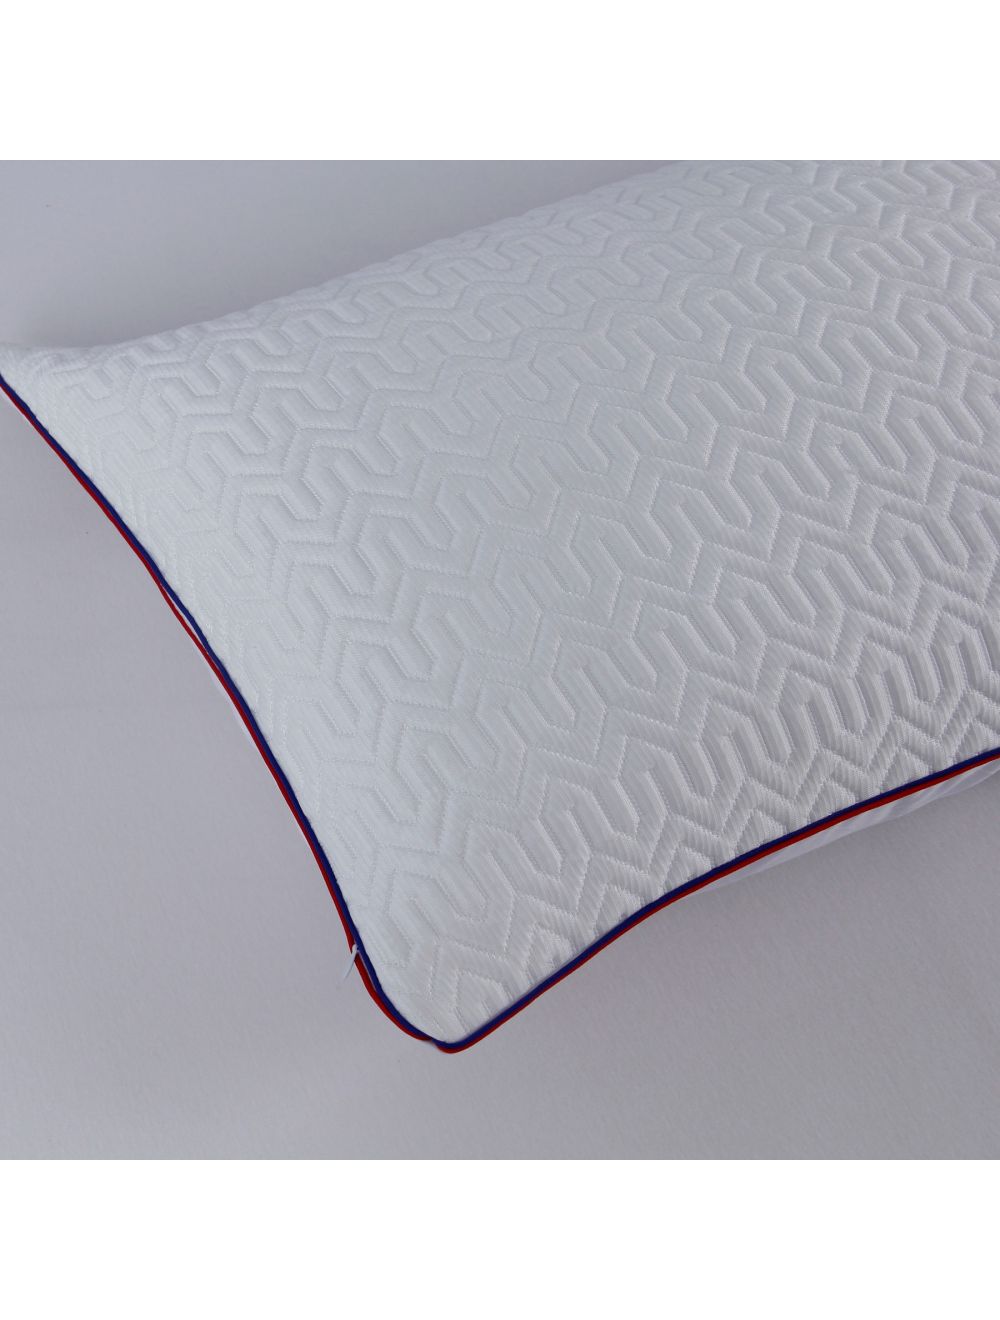 Hot/Cool Pillow Cover